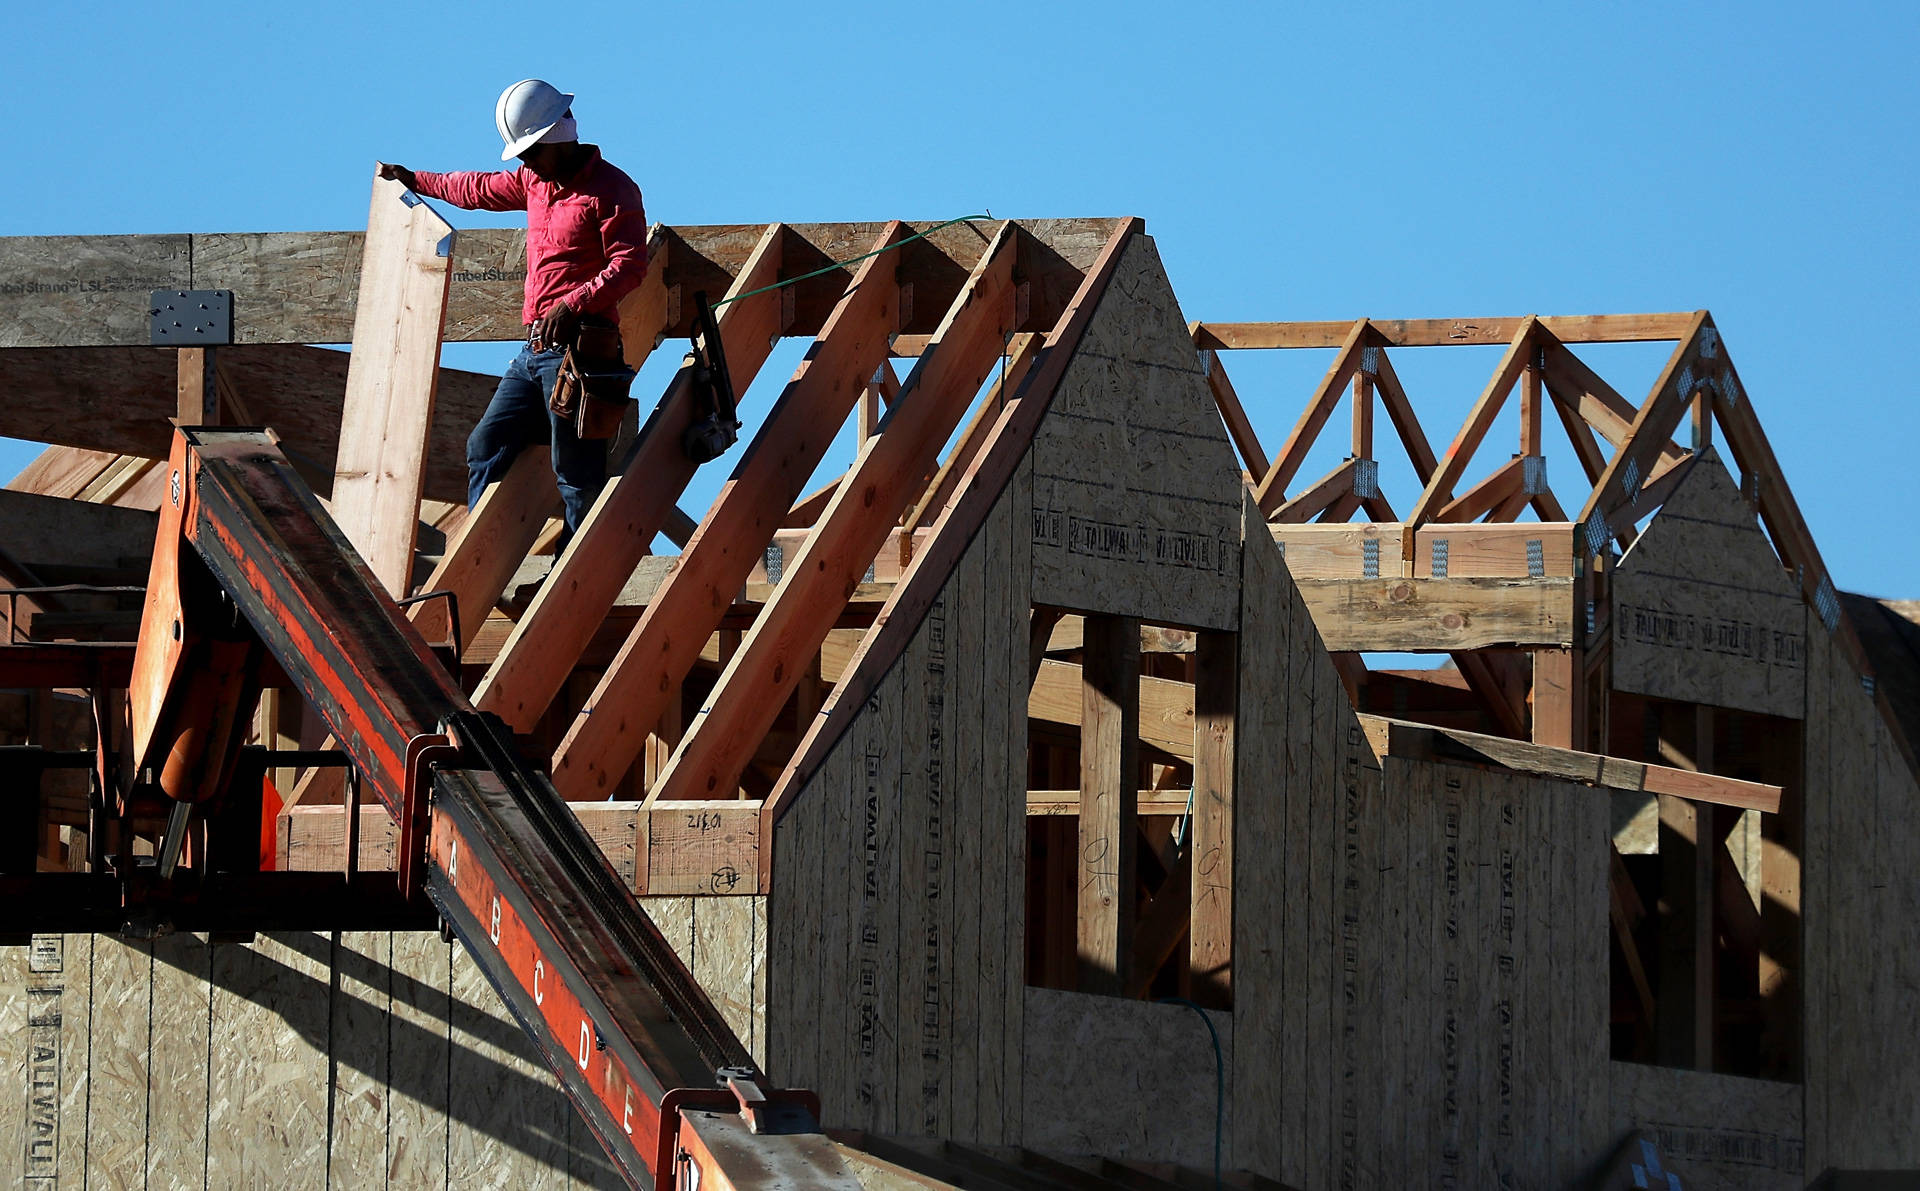 California is producing less than half the new homes it needs to meet demand, according to a new comprehensive analysis by California’s Department of Housing and Community Development. Justin Sullivan/Getty Images